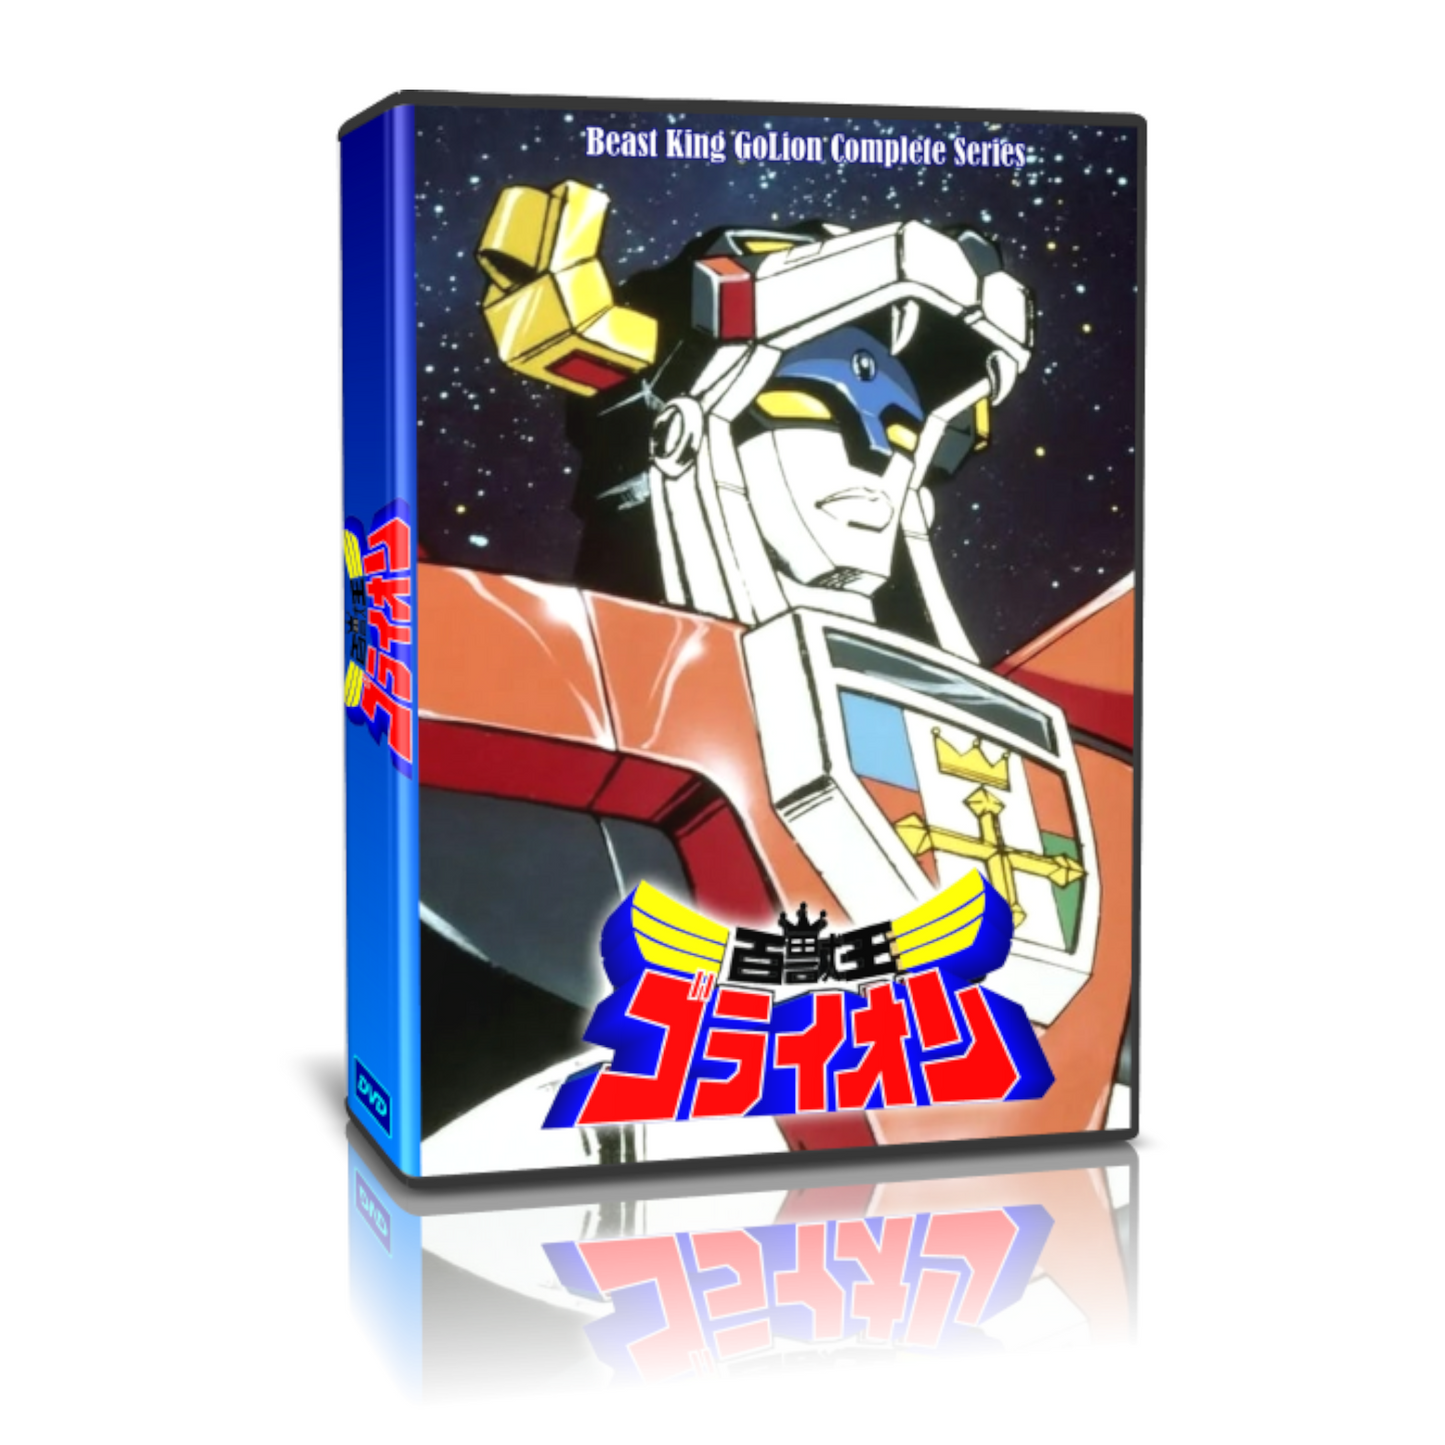 Voltron Beast King GoLion complete series english subbed DVD - RetroAnimation 